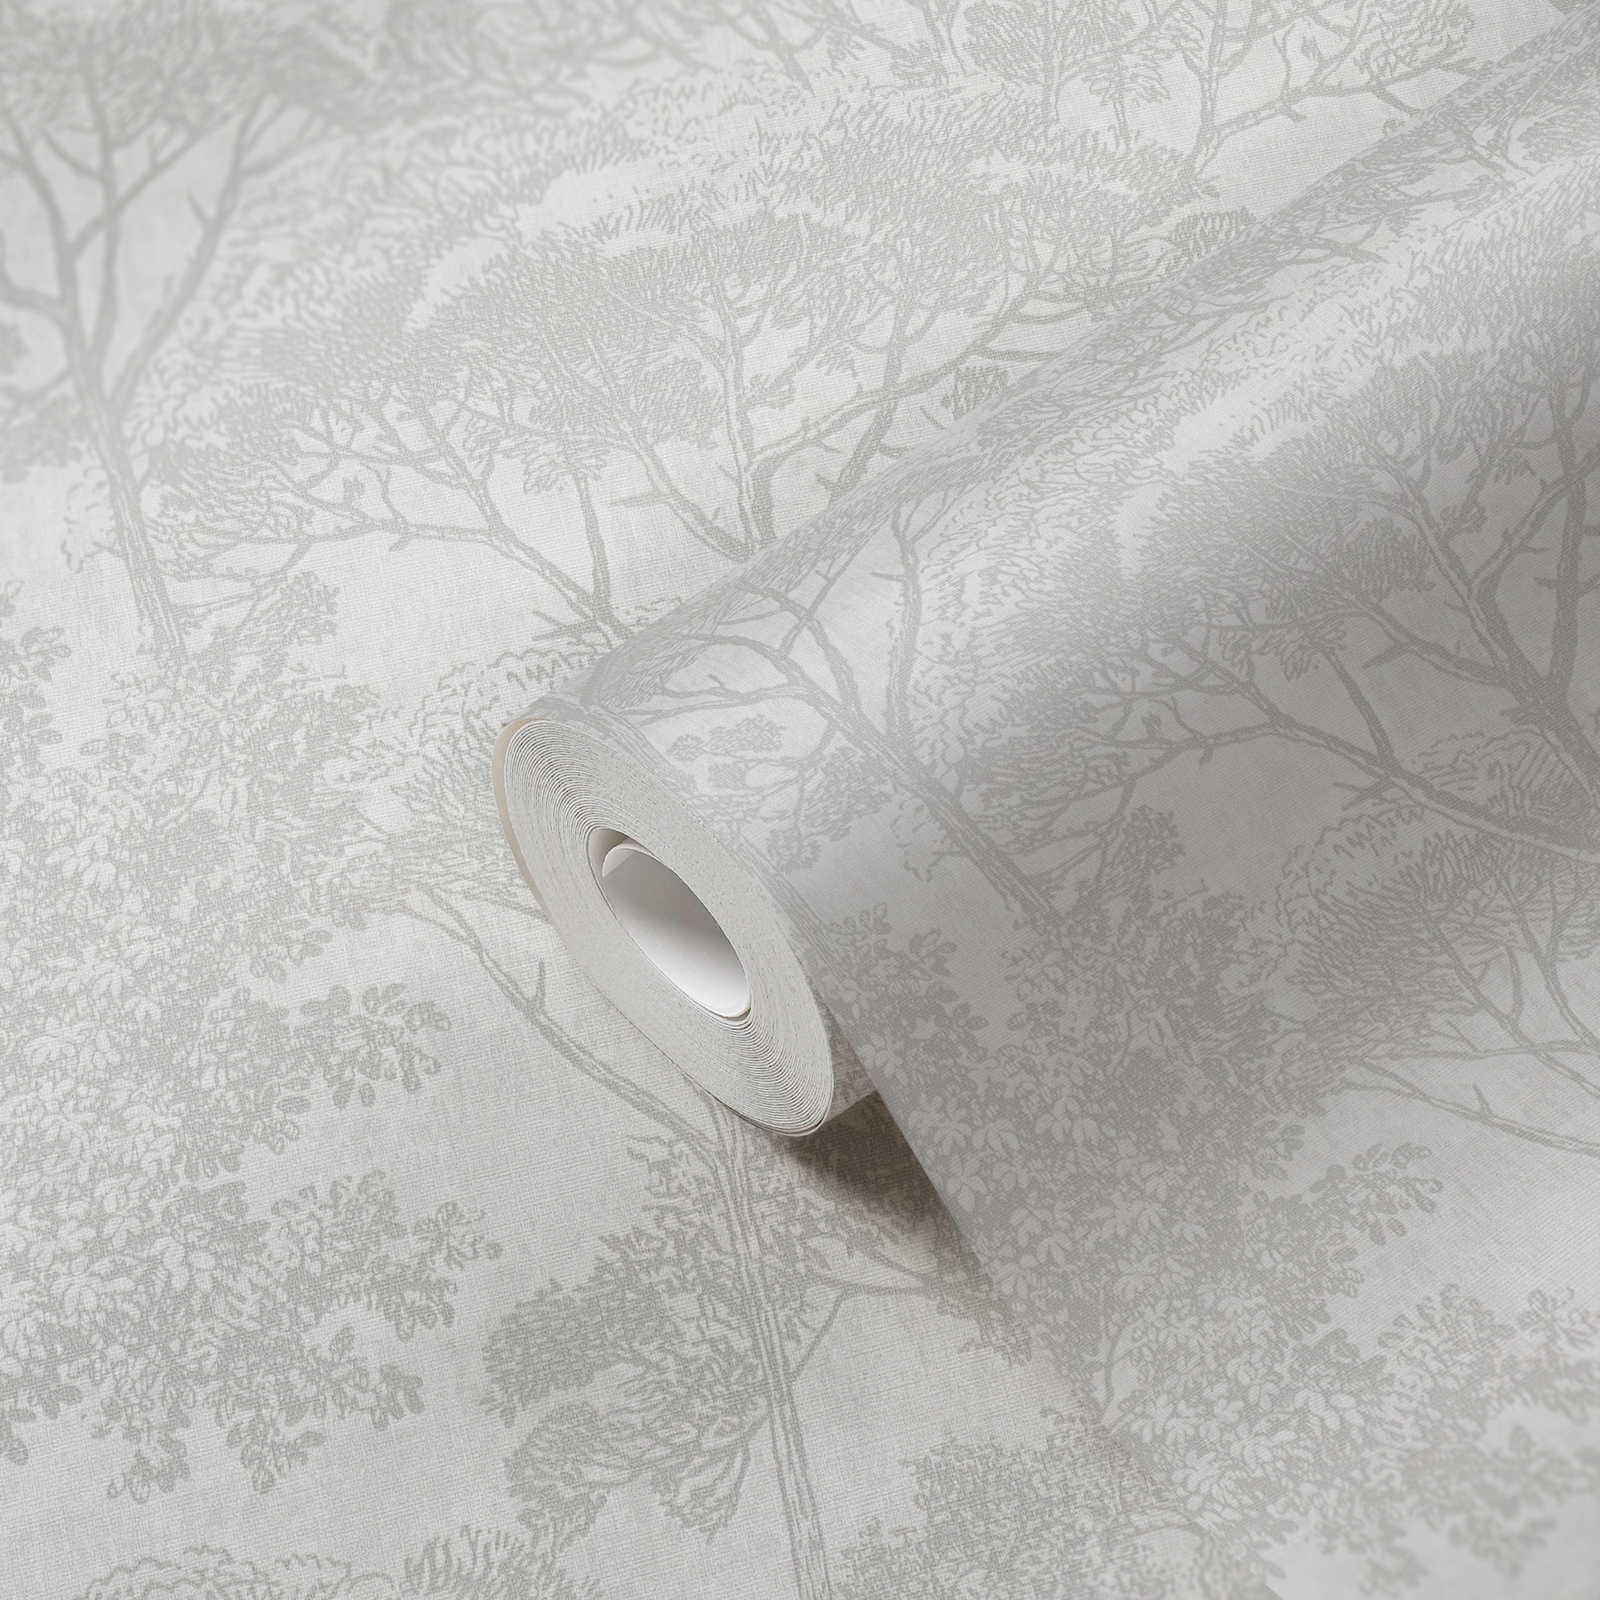             Wallpaper vintage natural pattern trees with linen look - beige, cream
        